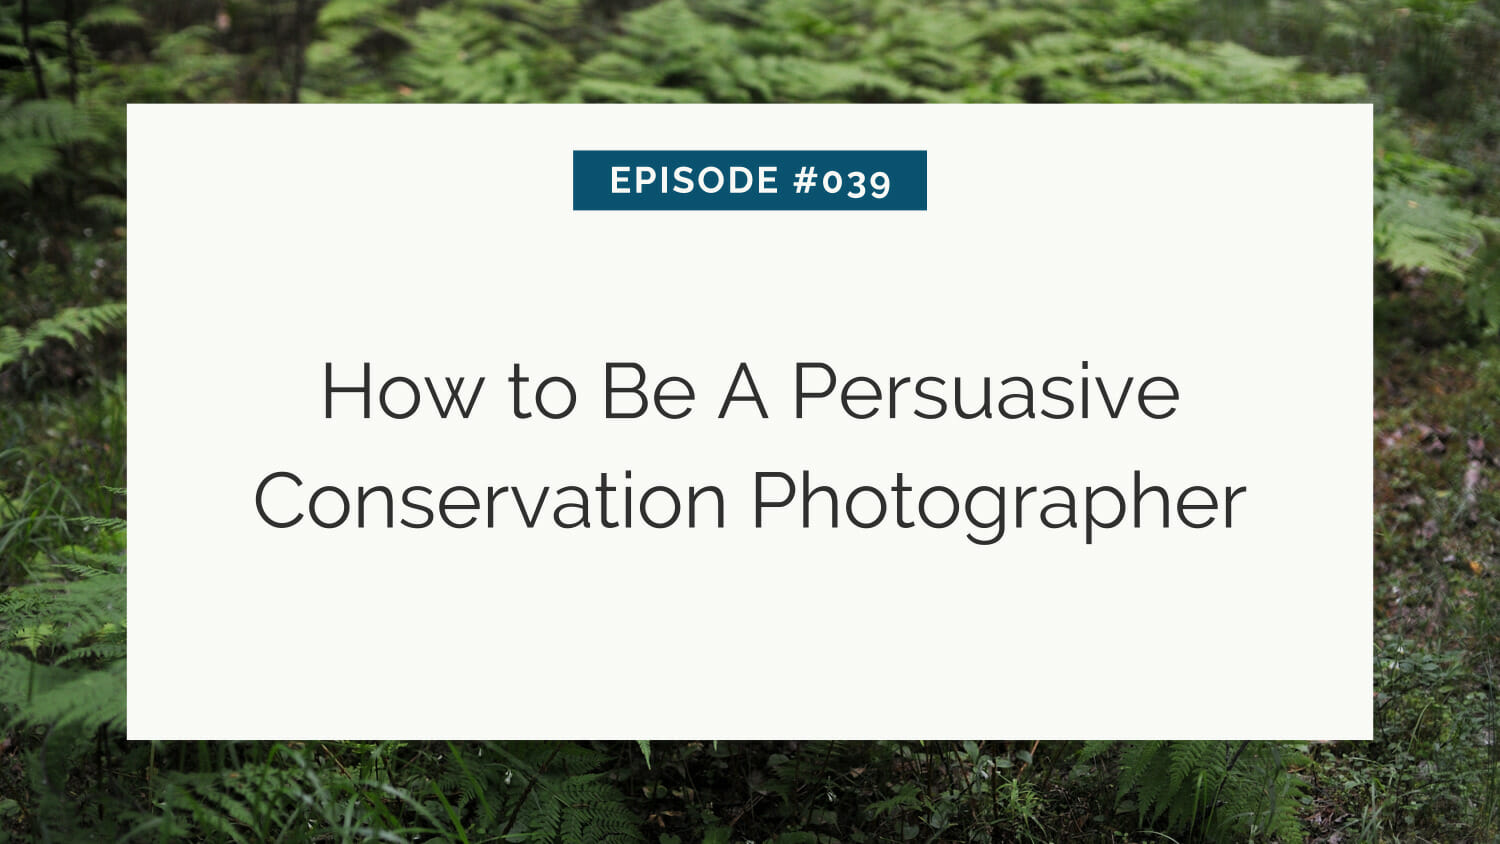 Title card for episode #039 discussing "how to be a persuasive conservation photographer" against a forest backdrop.